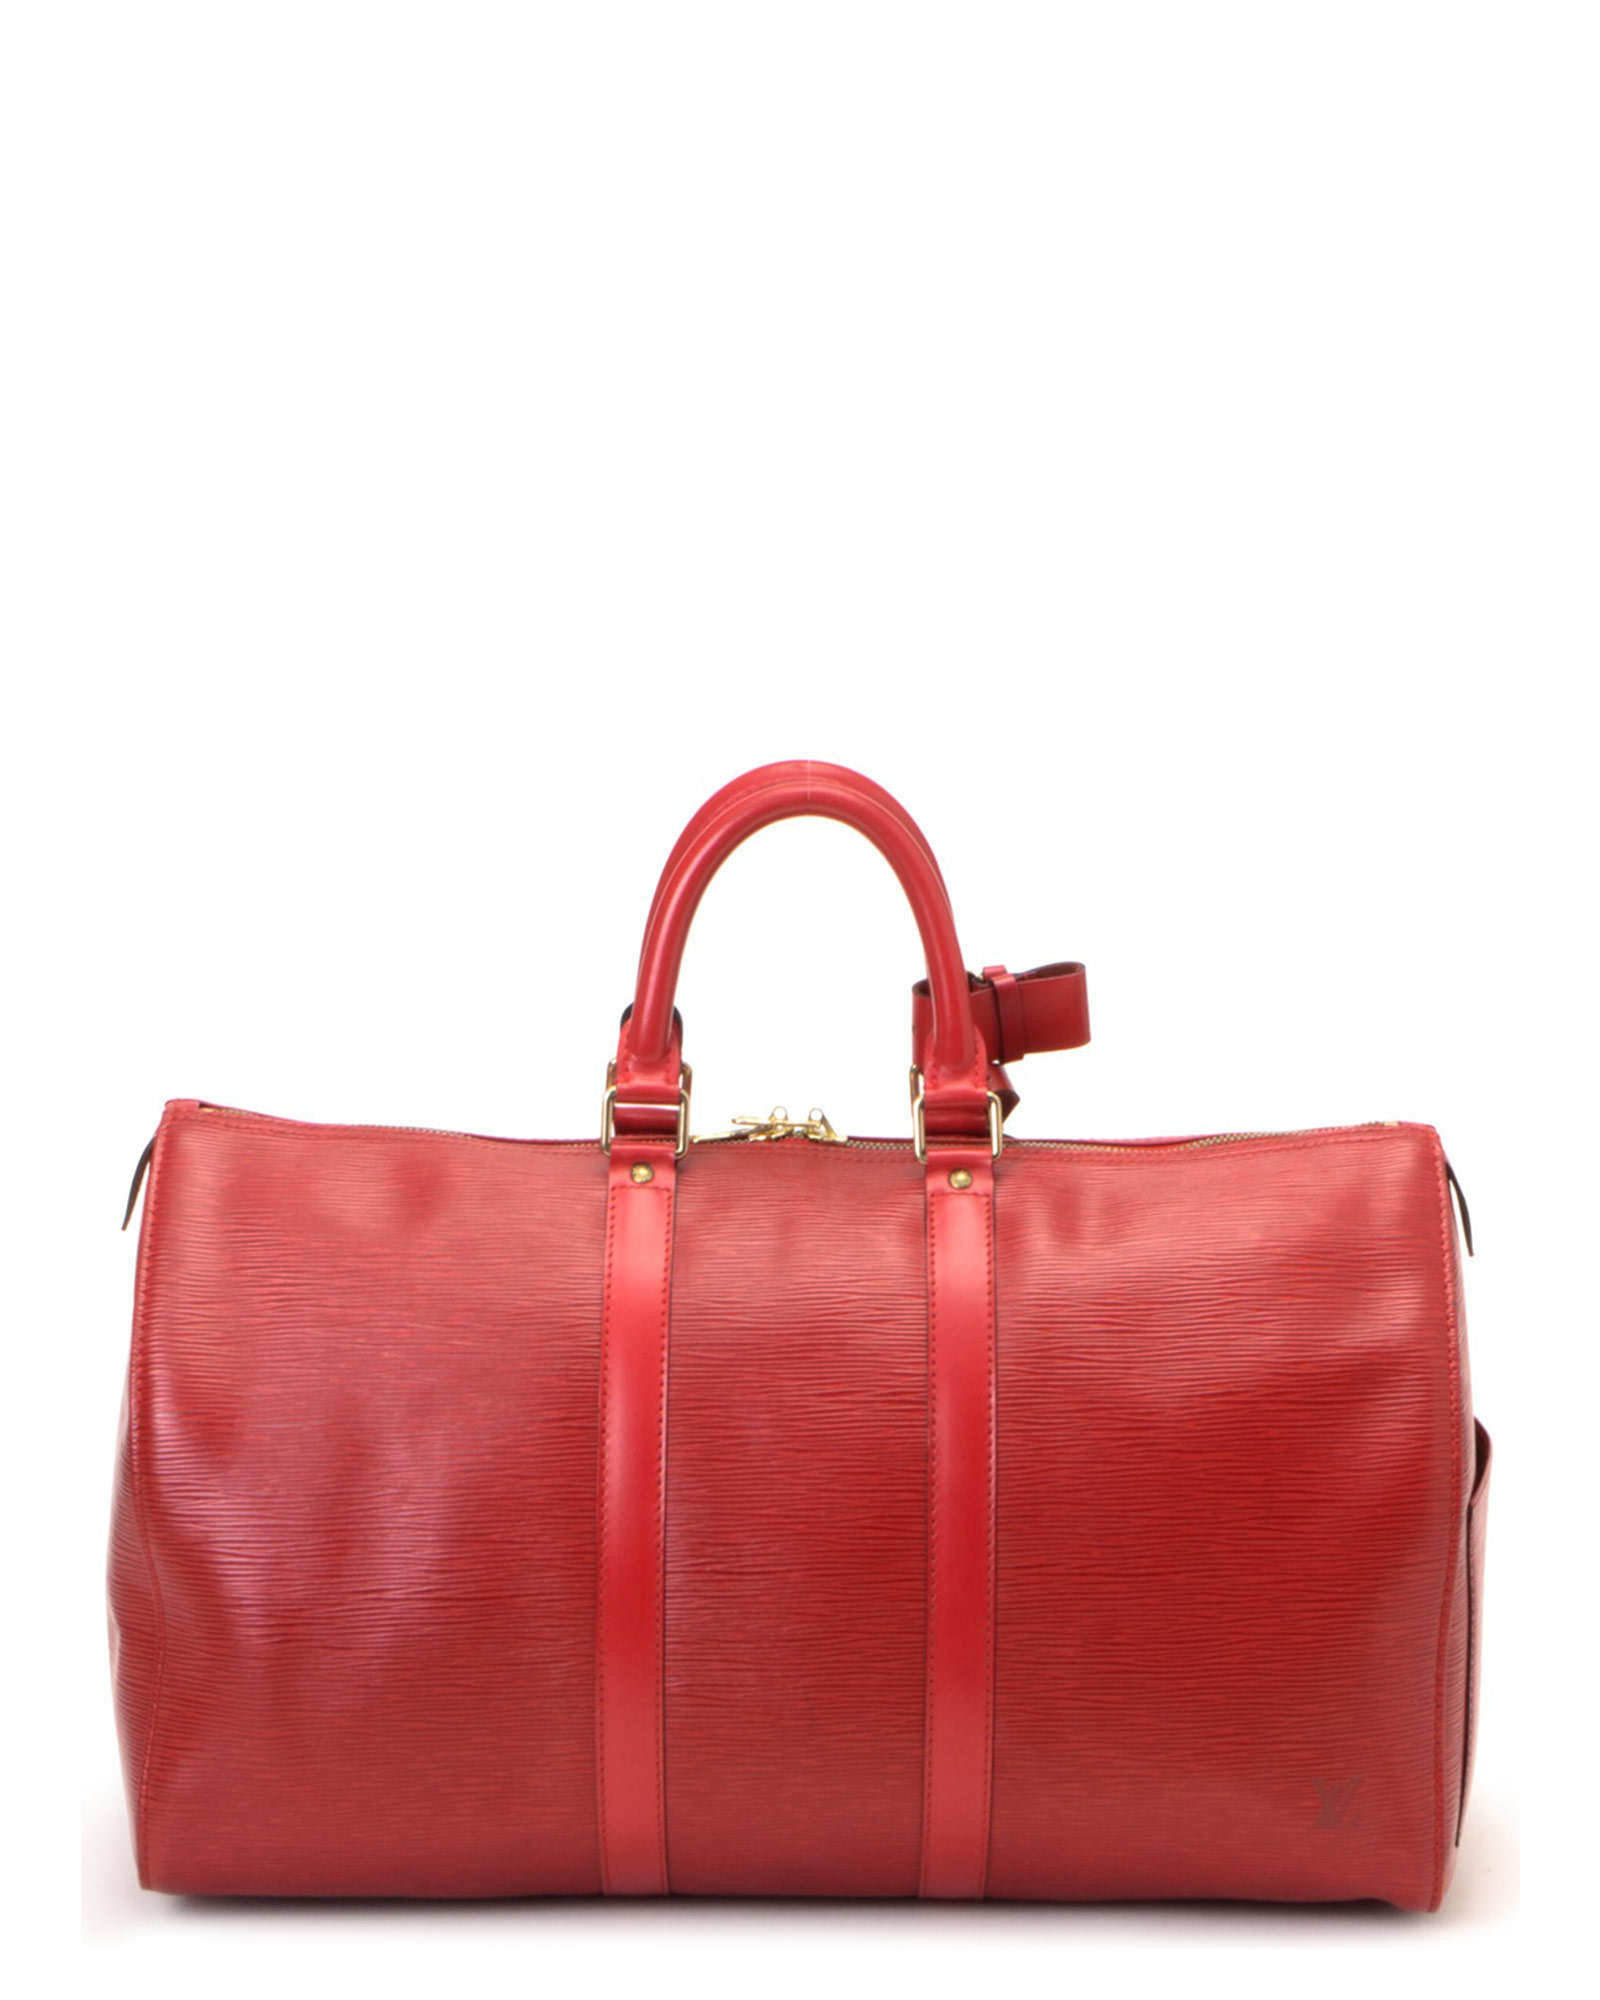 Lyst - Louis Vuitton Red Travel Bag - Vintage in Red for Men